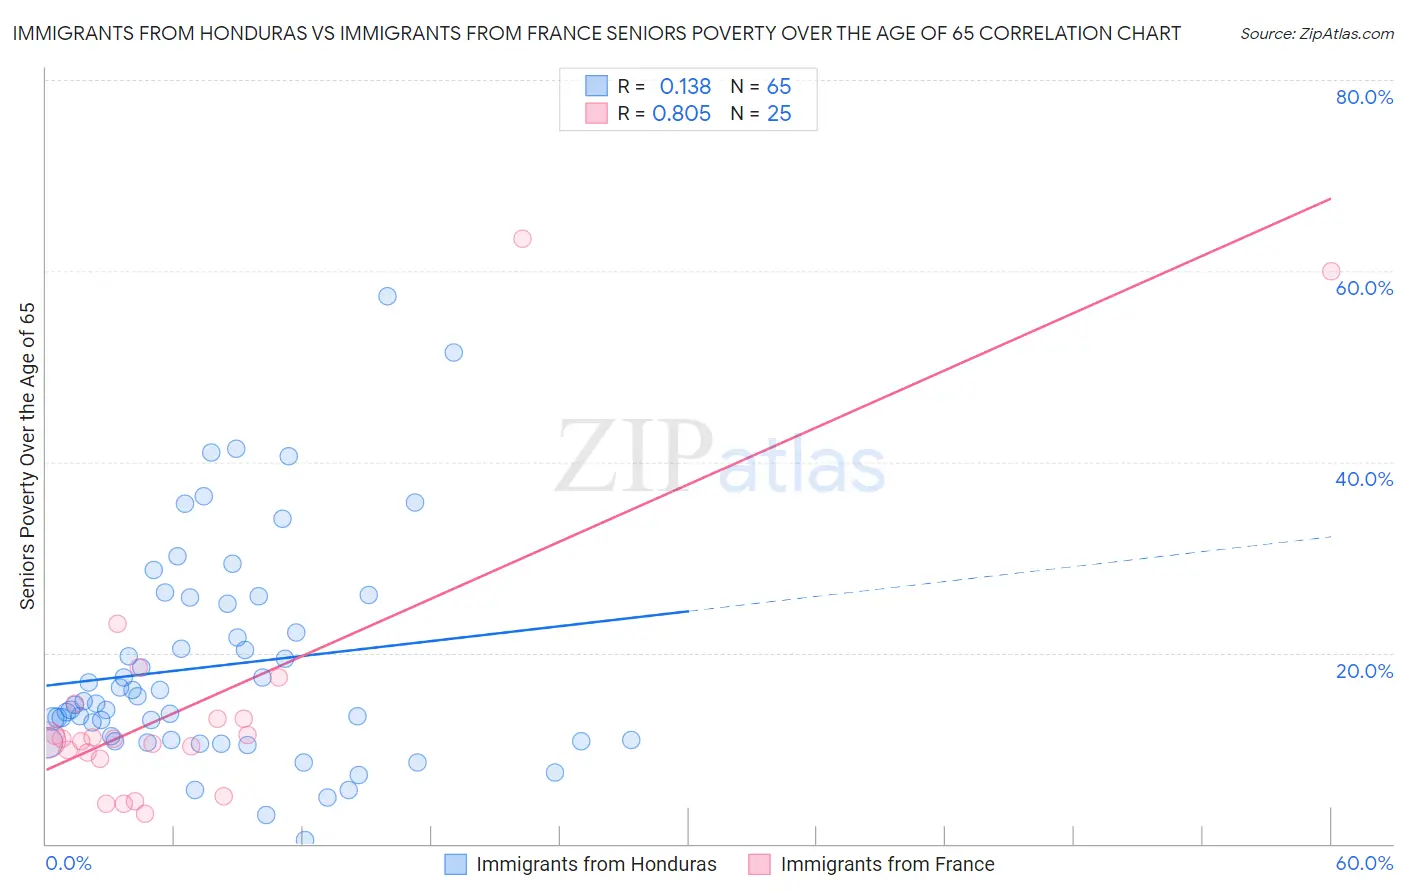 Immigrants from Honduras vs Immigrants from France Seniors Poverty Over the Age of 65